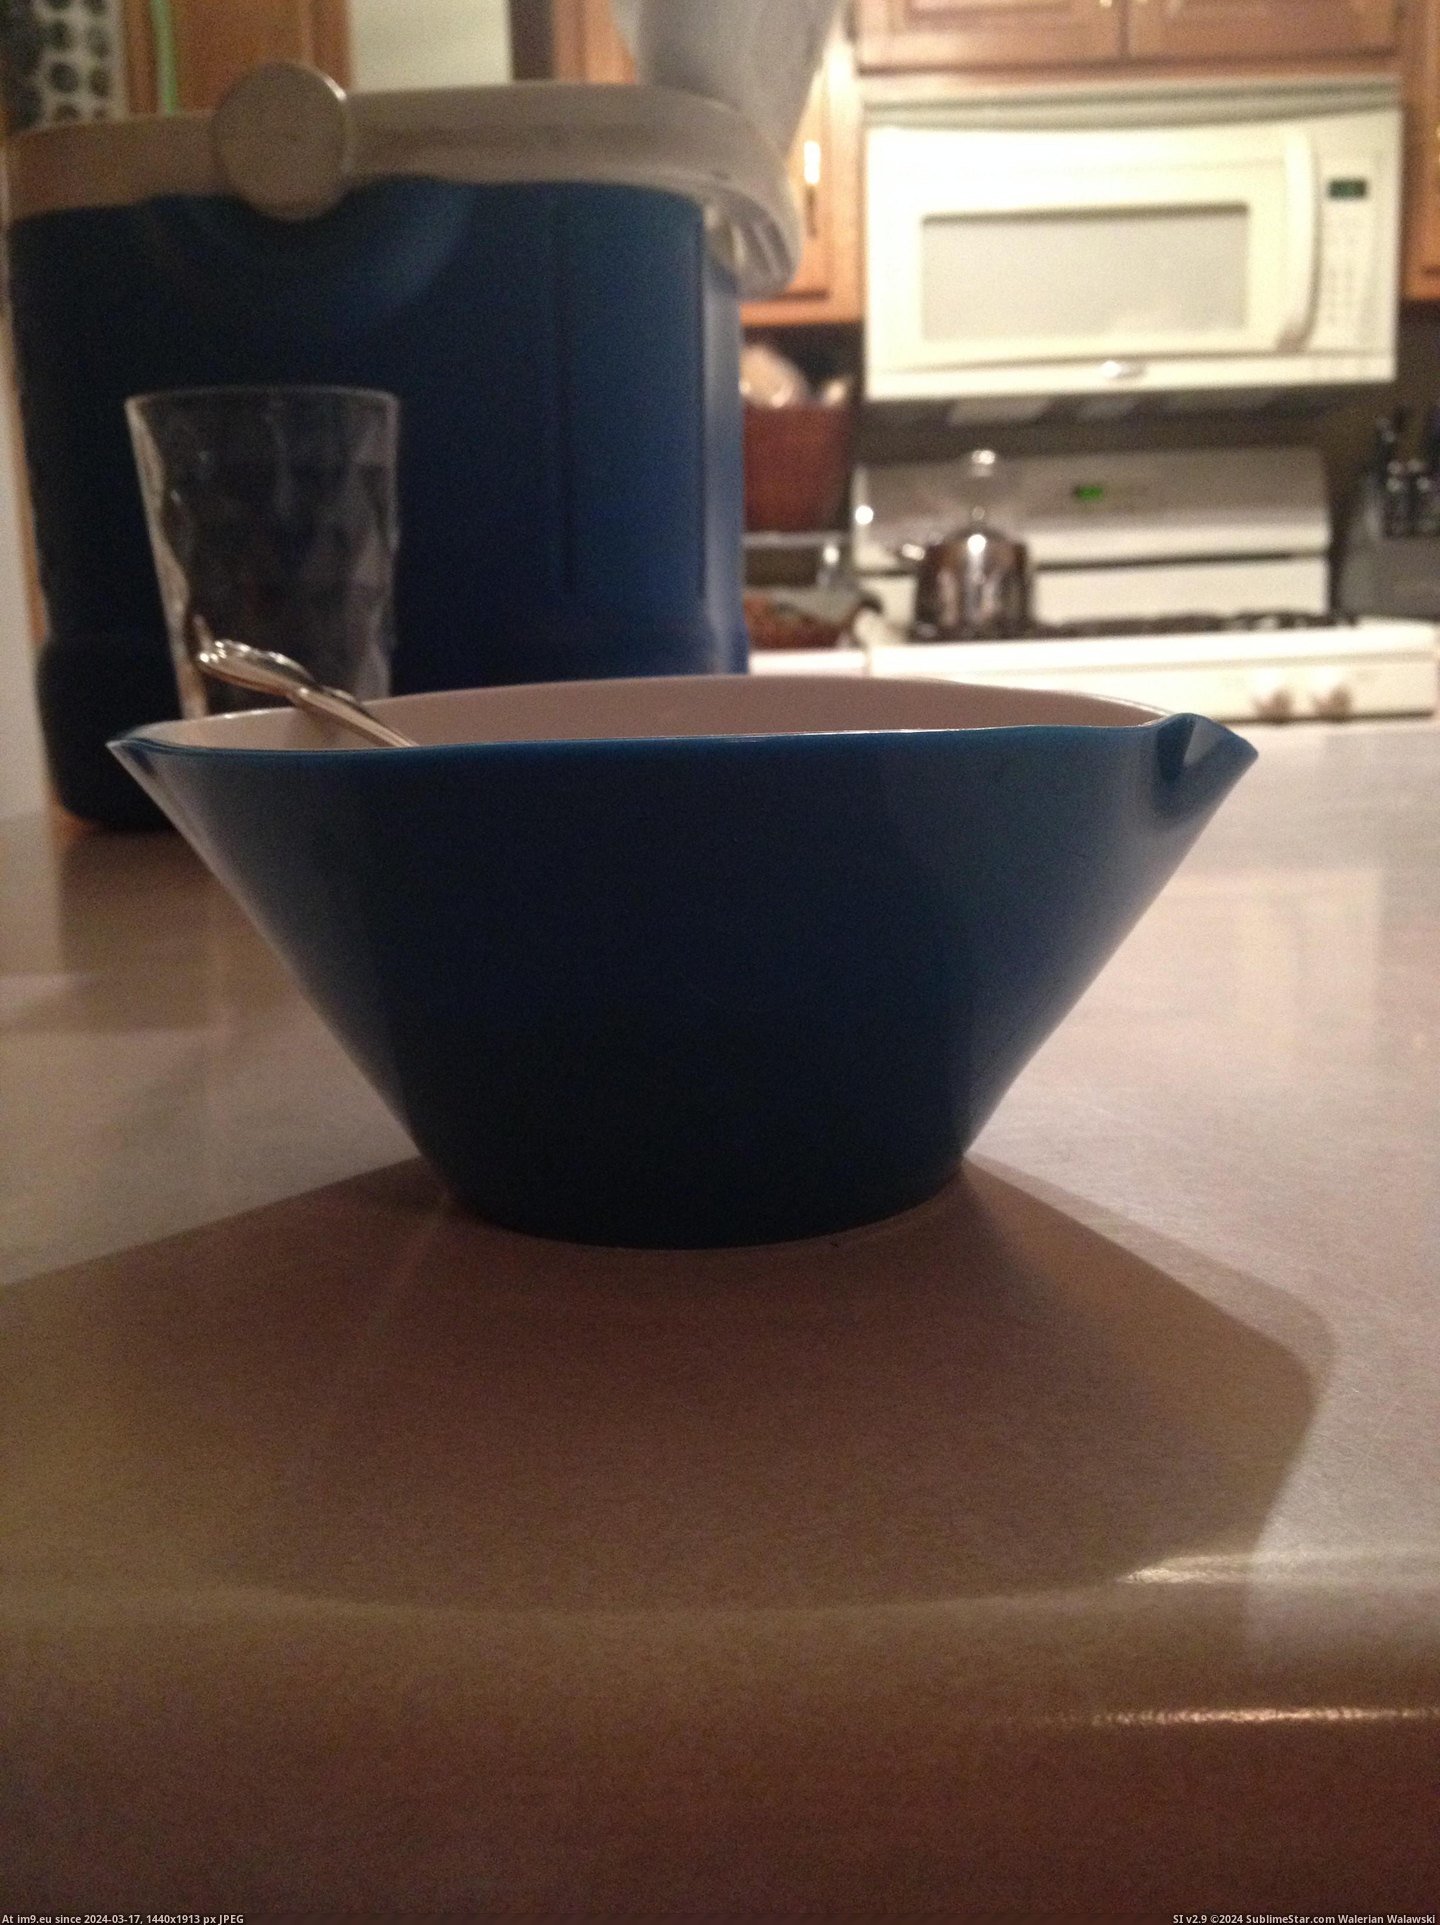 #Was #Perfect #Bowl #Spot #Circular #Sipping #Reformed #Shape #Cereal #Soo #Dishwasher [Mildlyinteresting] Soo my cereal bowl, normally circular in shape, was reformed by my dishwasher to make a perfect sipping spot Pic. (Obraz z album My r/MILDLYINTERESTING favs))